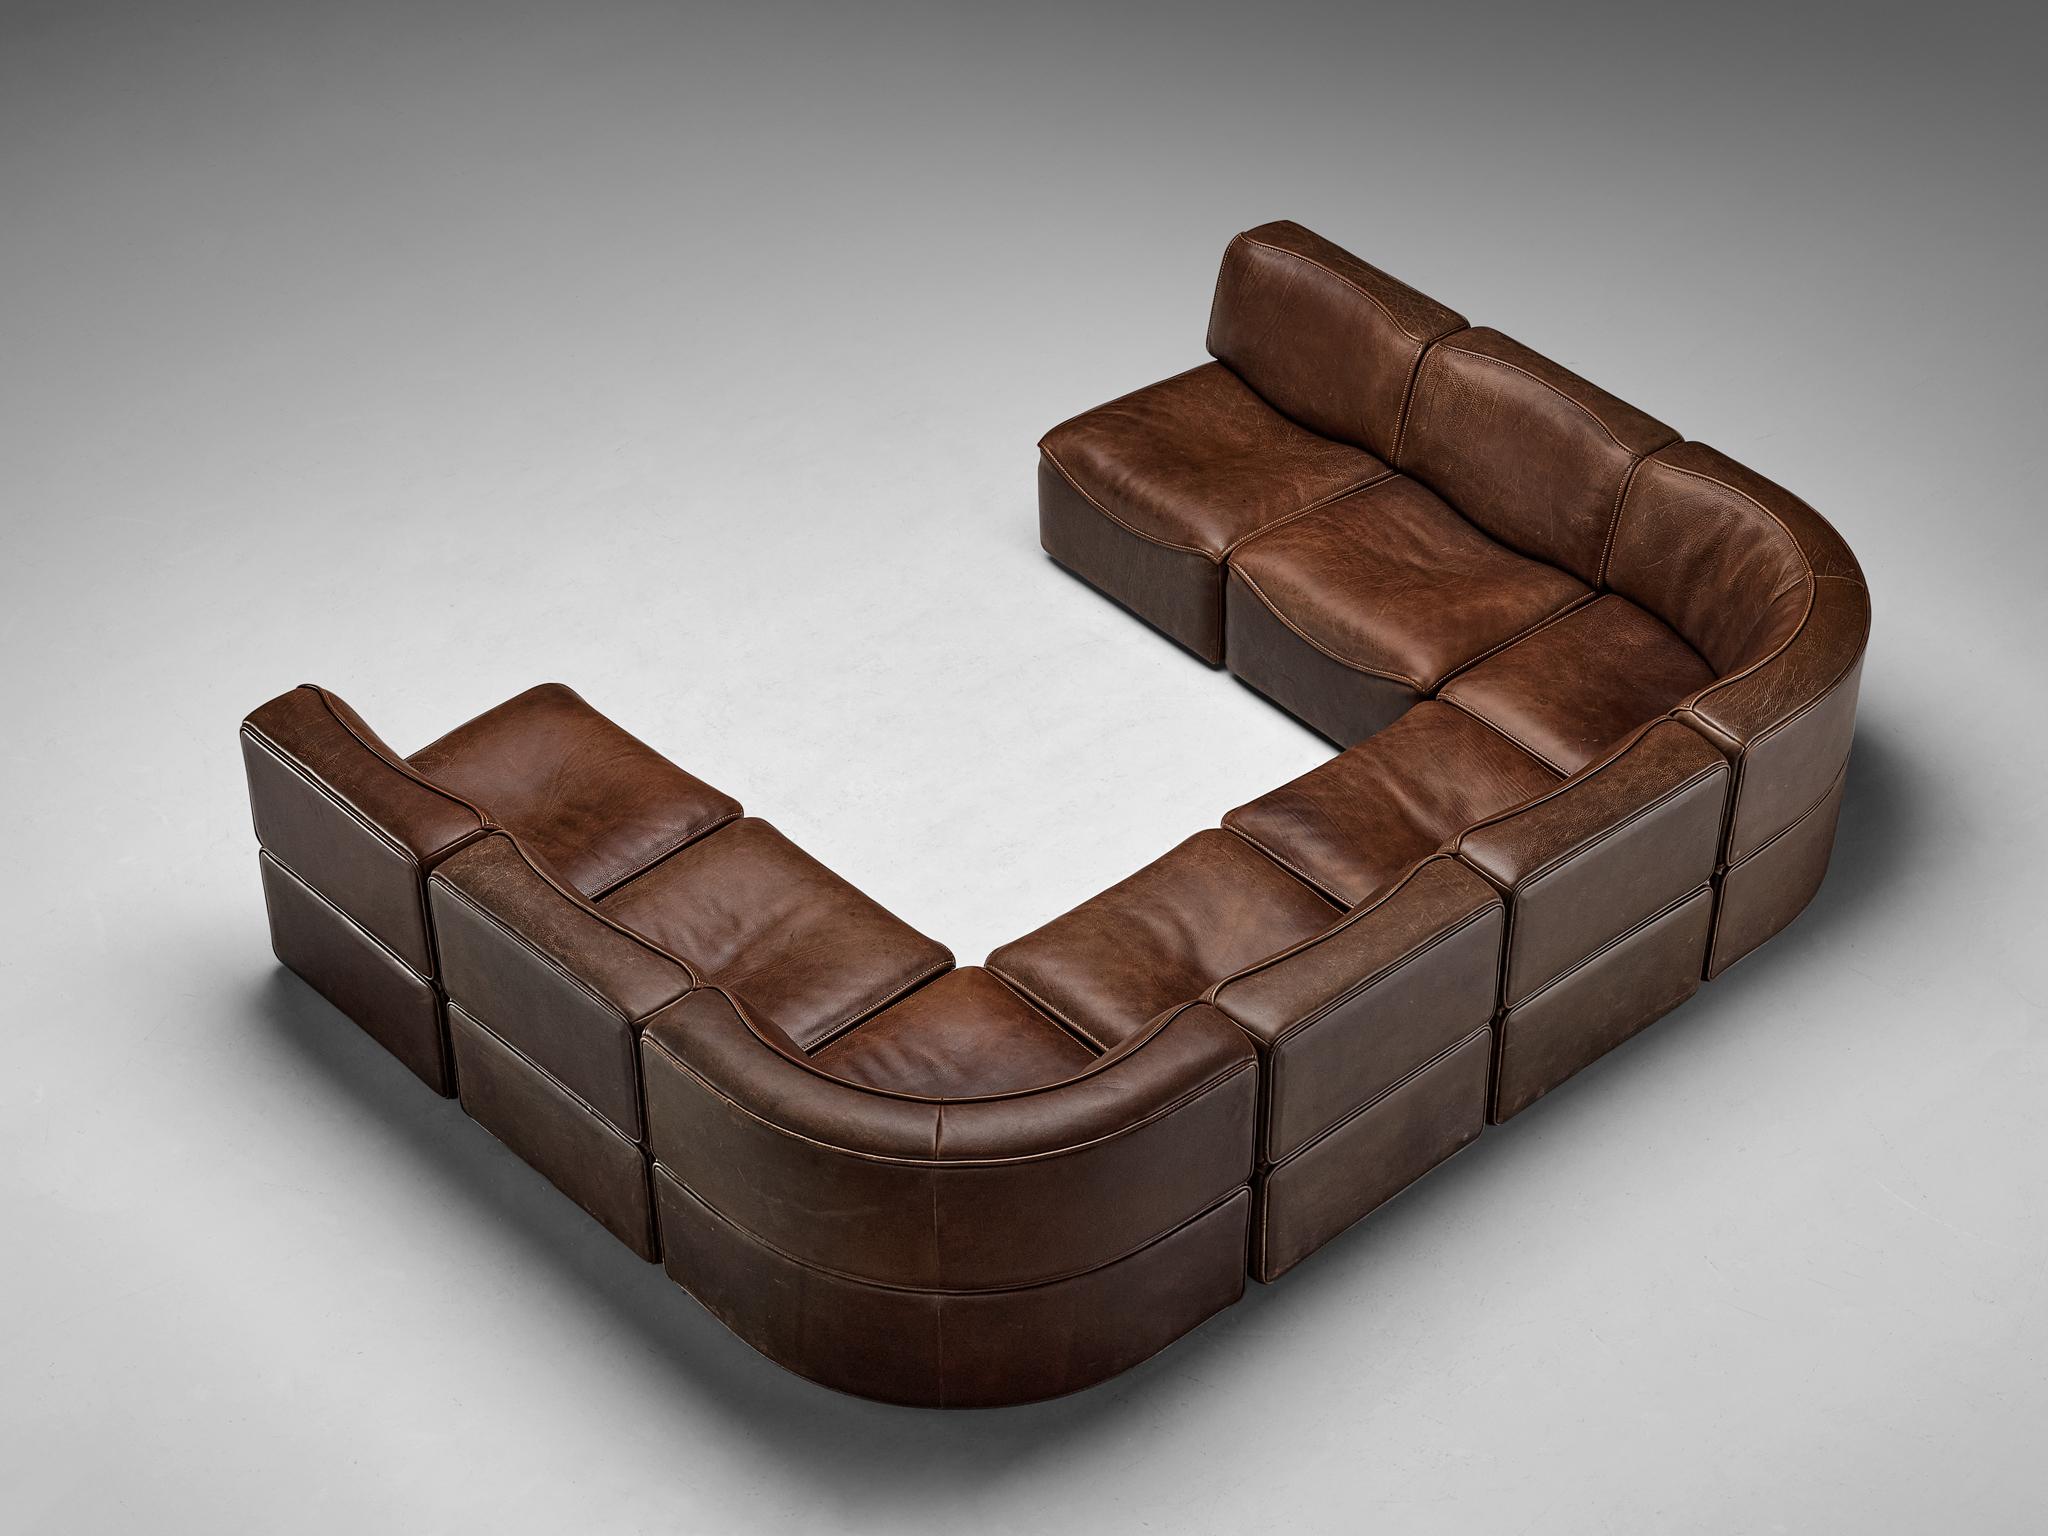 De Sede, 'DS-15' sectional sofa, patinated leather, Switzerland, 1970s.

This high-quality sectional sofa designed by De Sede in the 1970s contains six regular elements and two corner elements, making it possible to arrange this sofa to your own